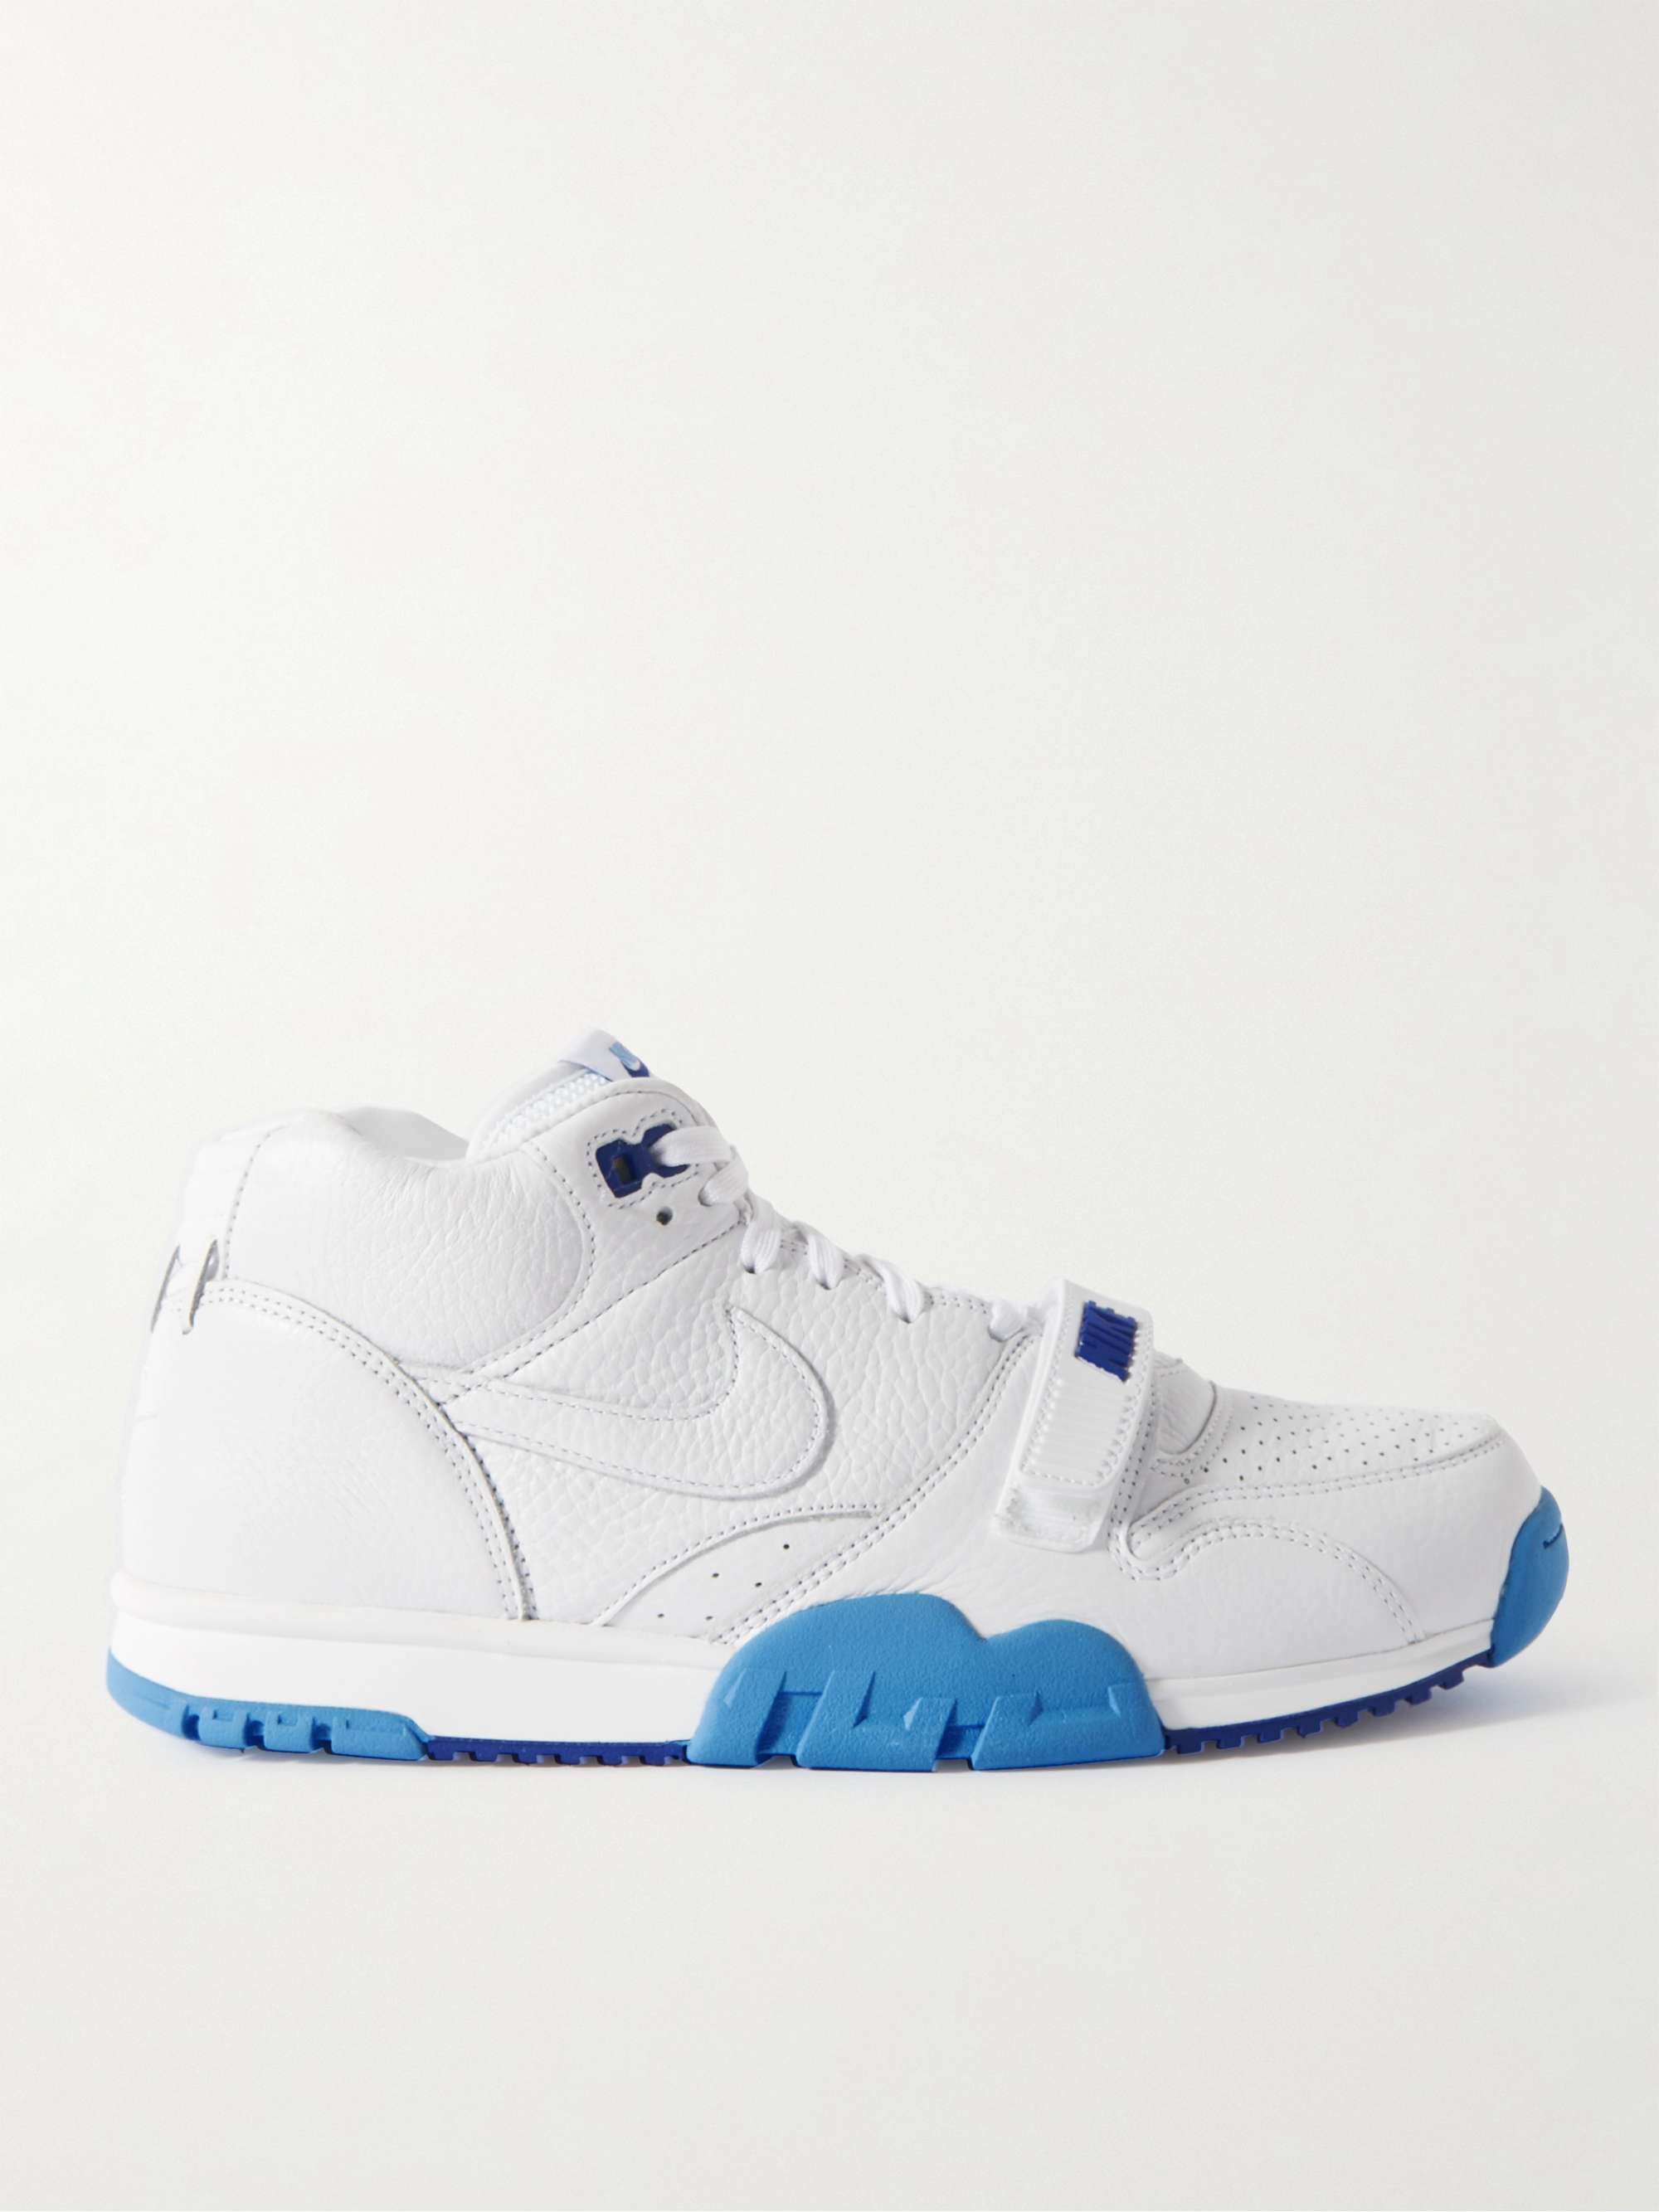 NIKE Air Trainer 1 Leather Sneakers